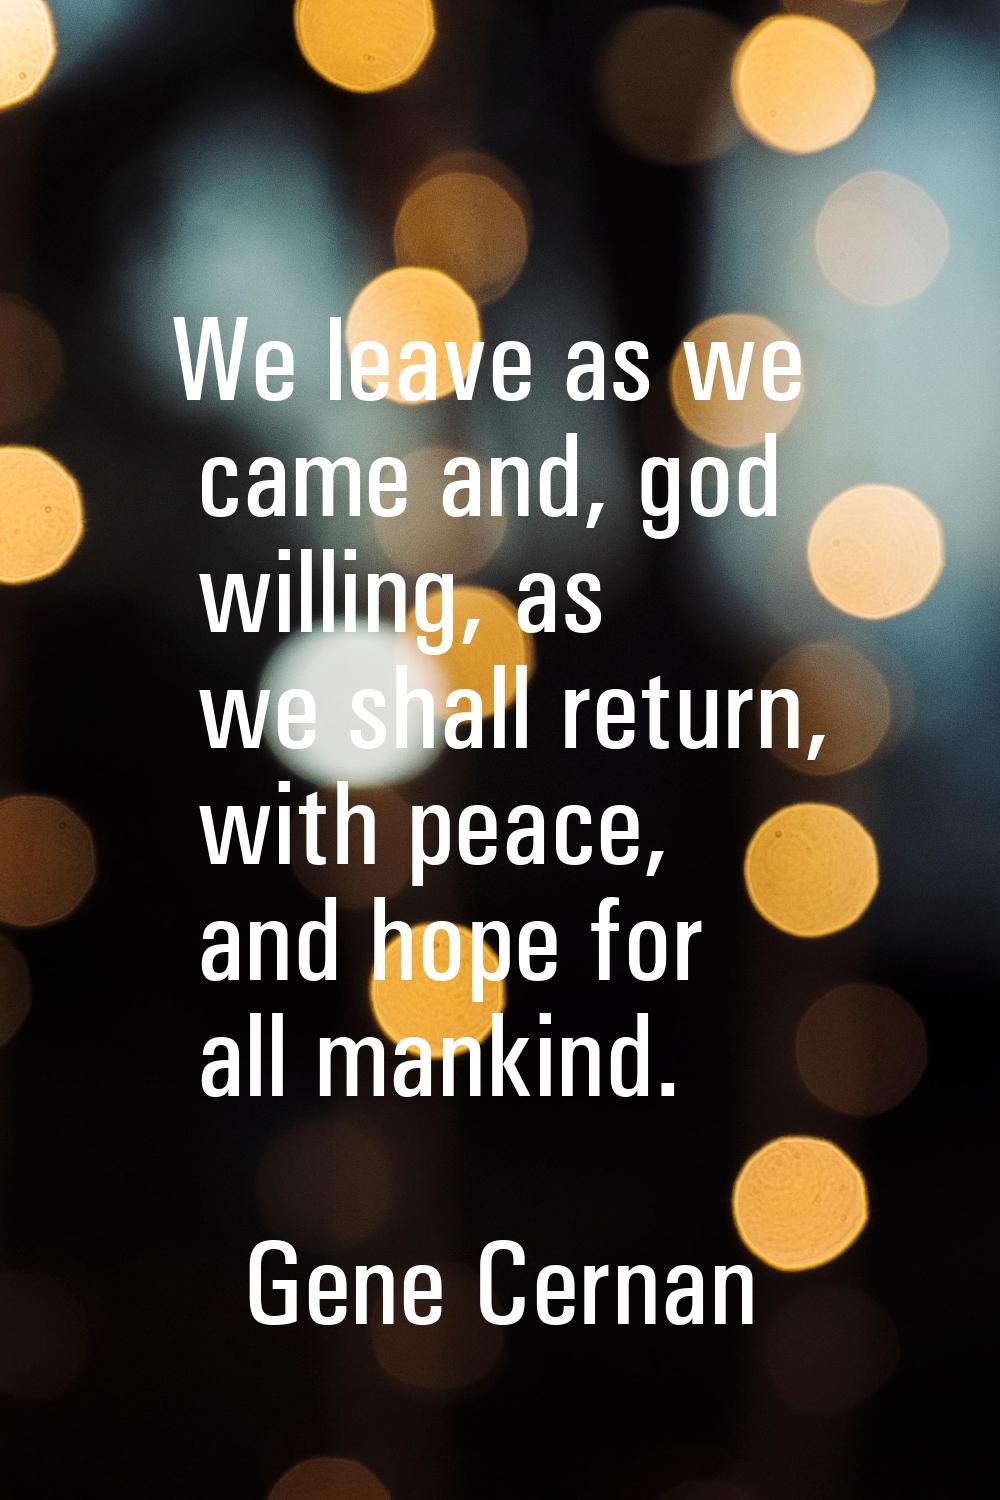 We leave as we came and, god willing, as we shall return, with peace, and hope for all mankind.